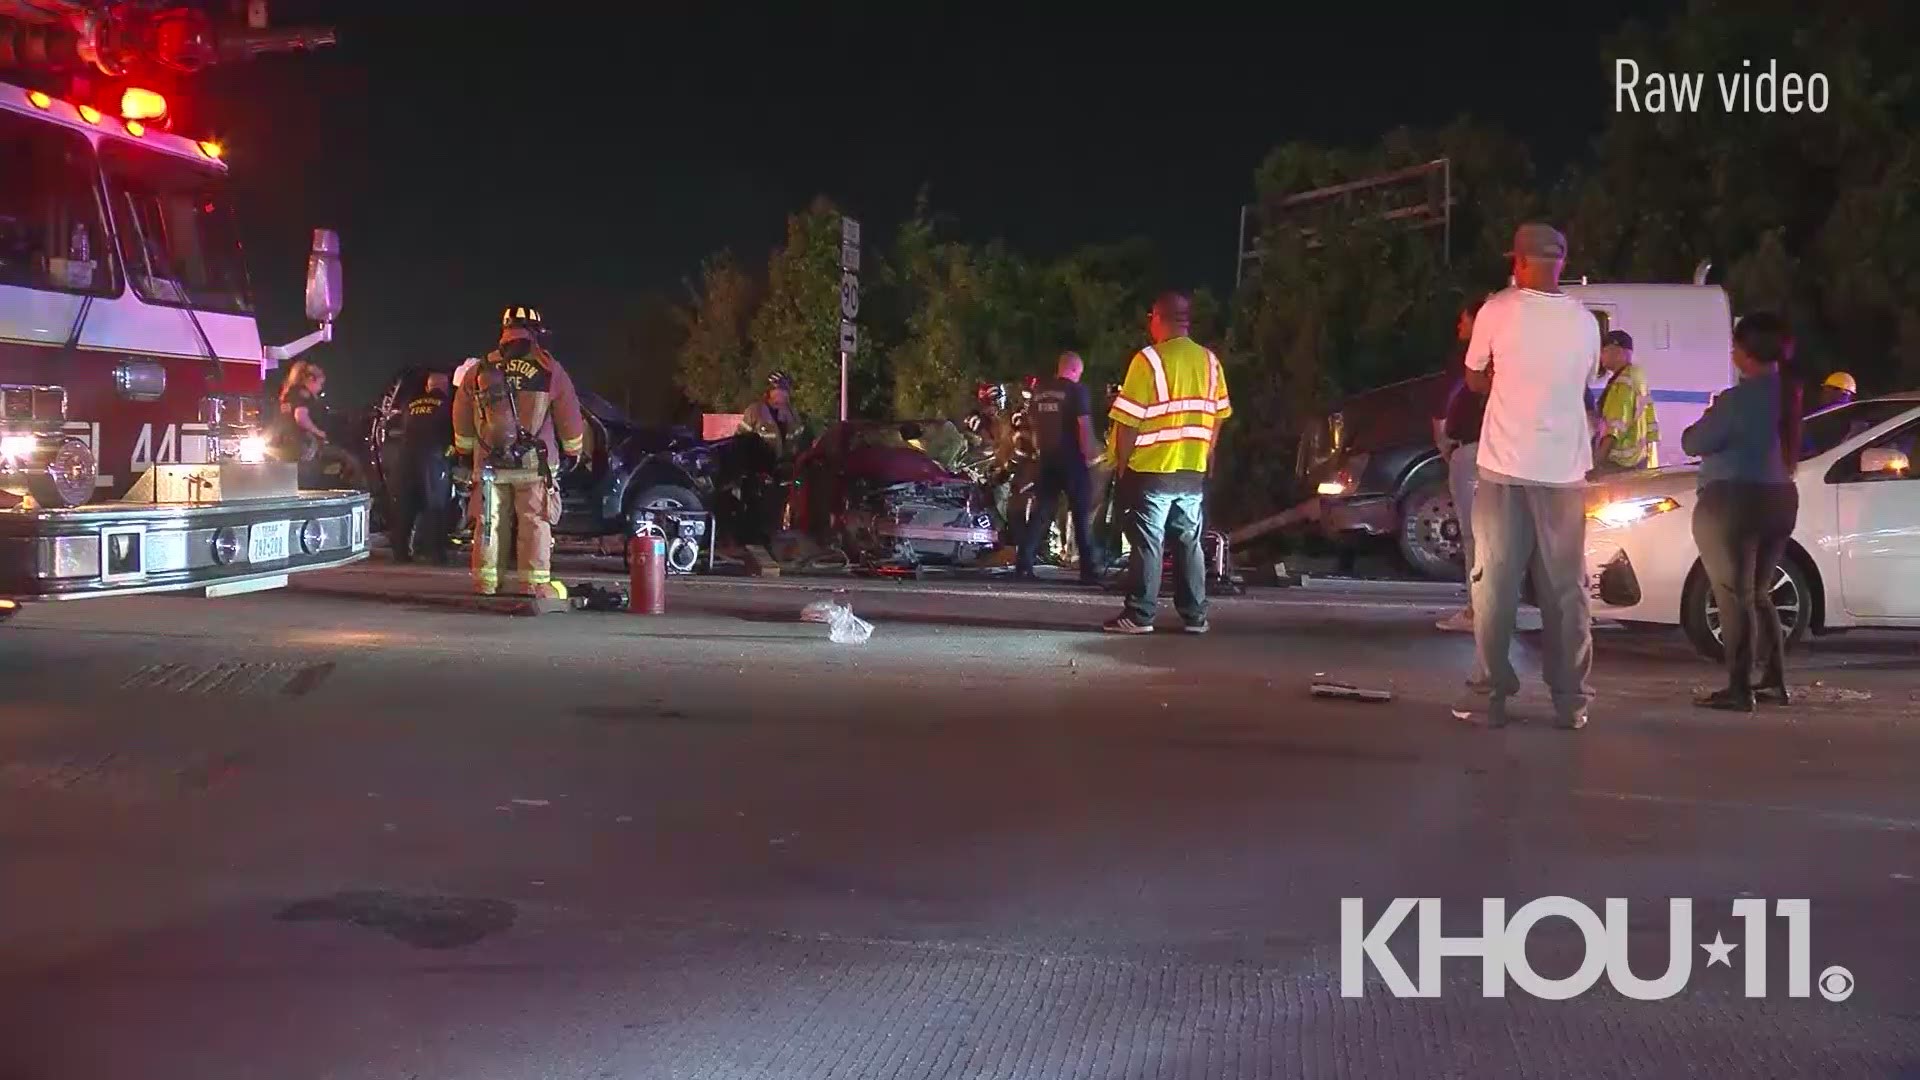 Two drivers were hospitalized after a serious crash that ended with a woman trapped inside her car. The crash happened at about 12 a.m. Wednesday night on Maxey near Wallisville in northeast Houston.